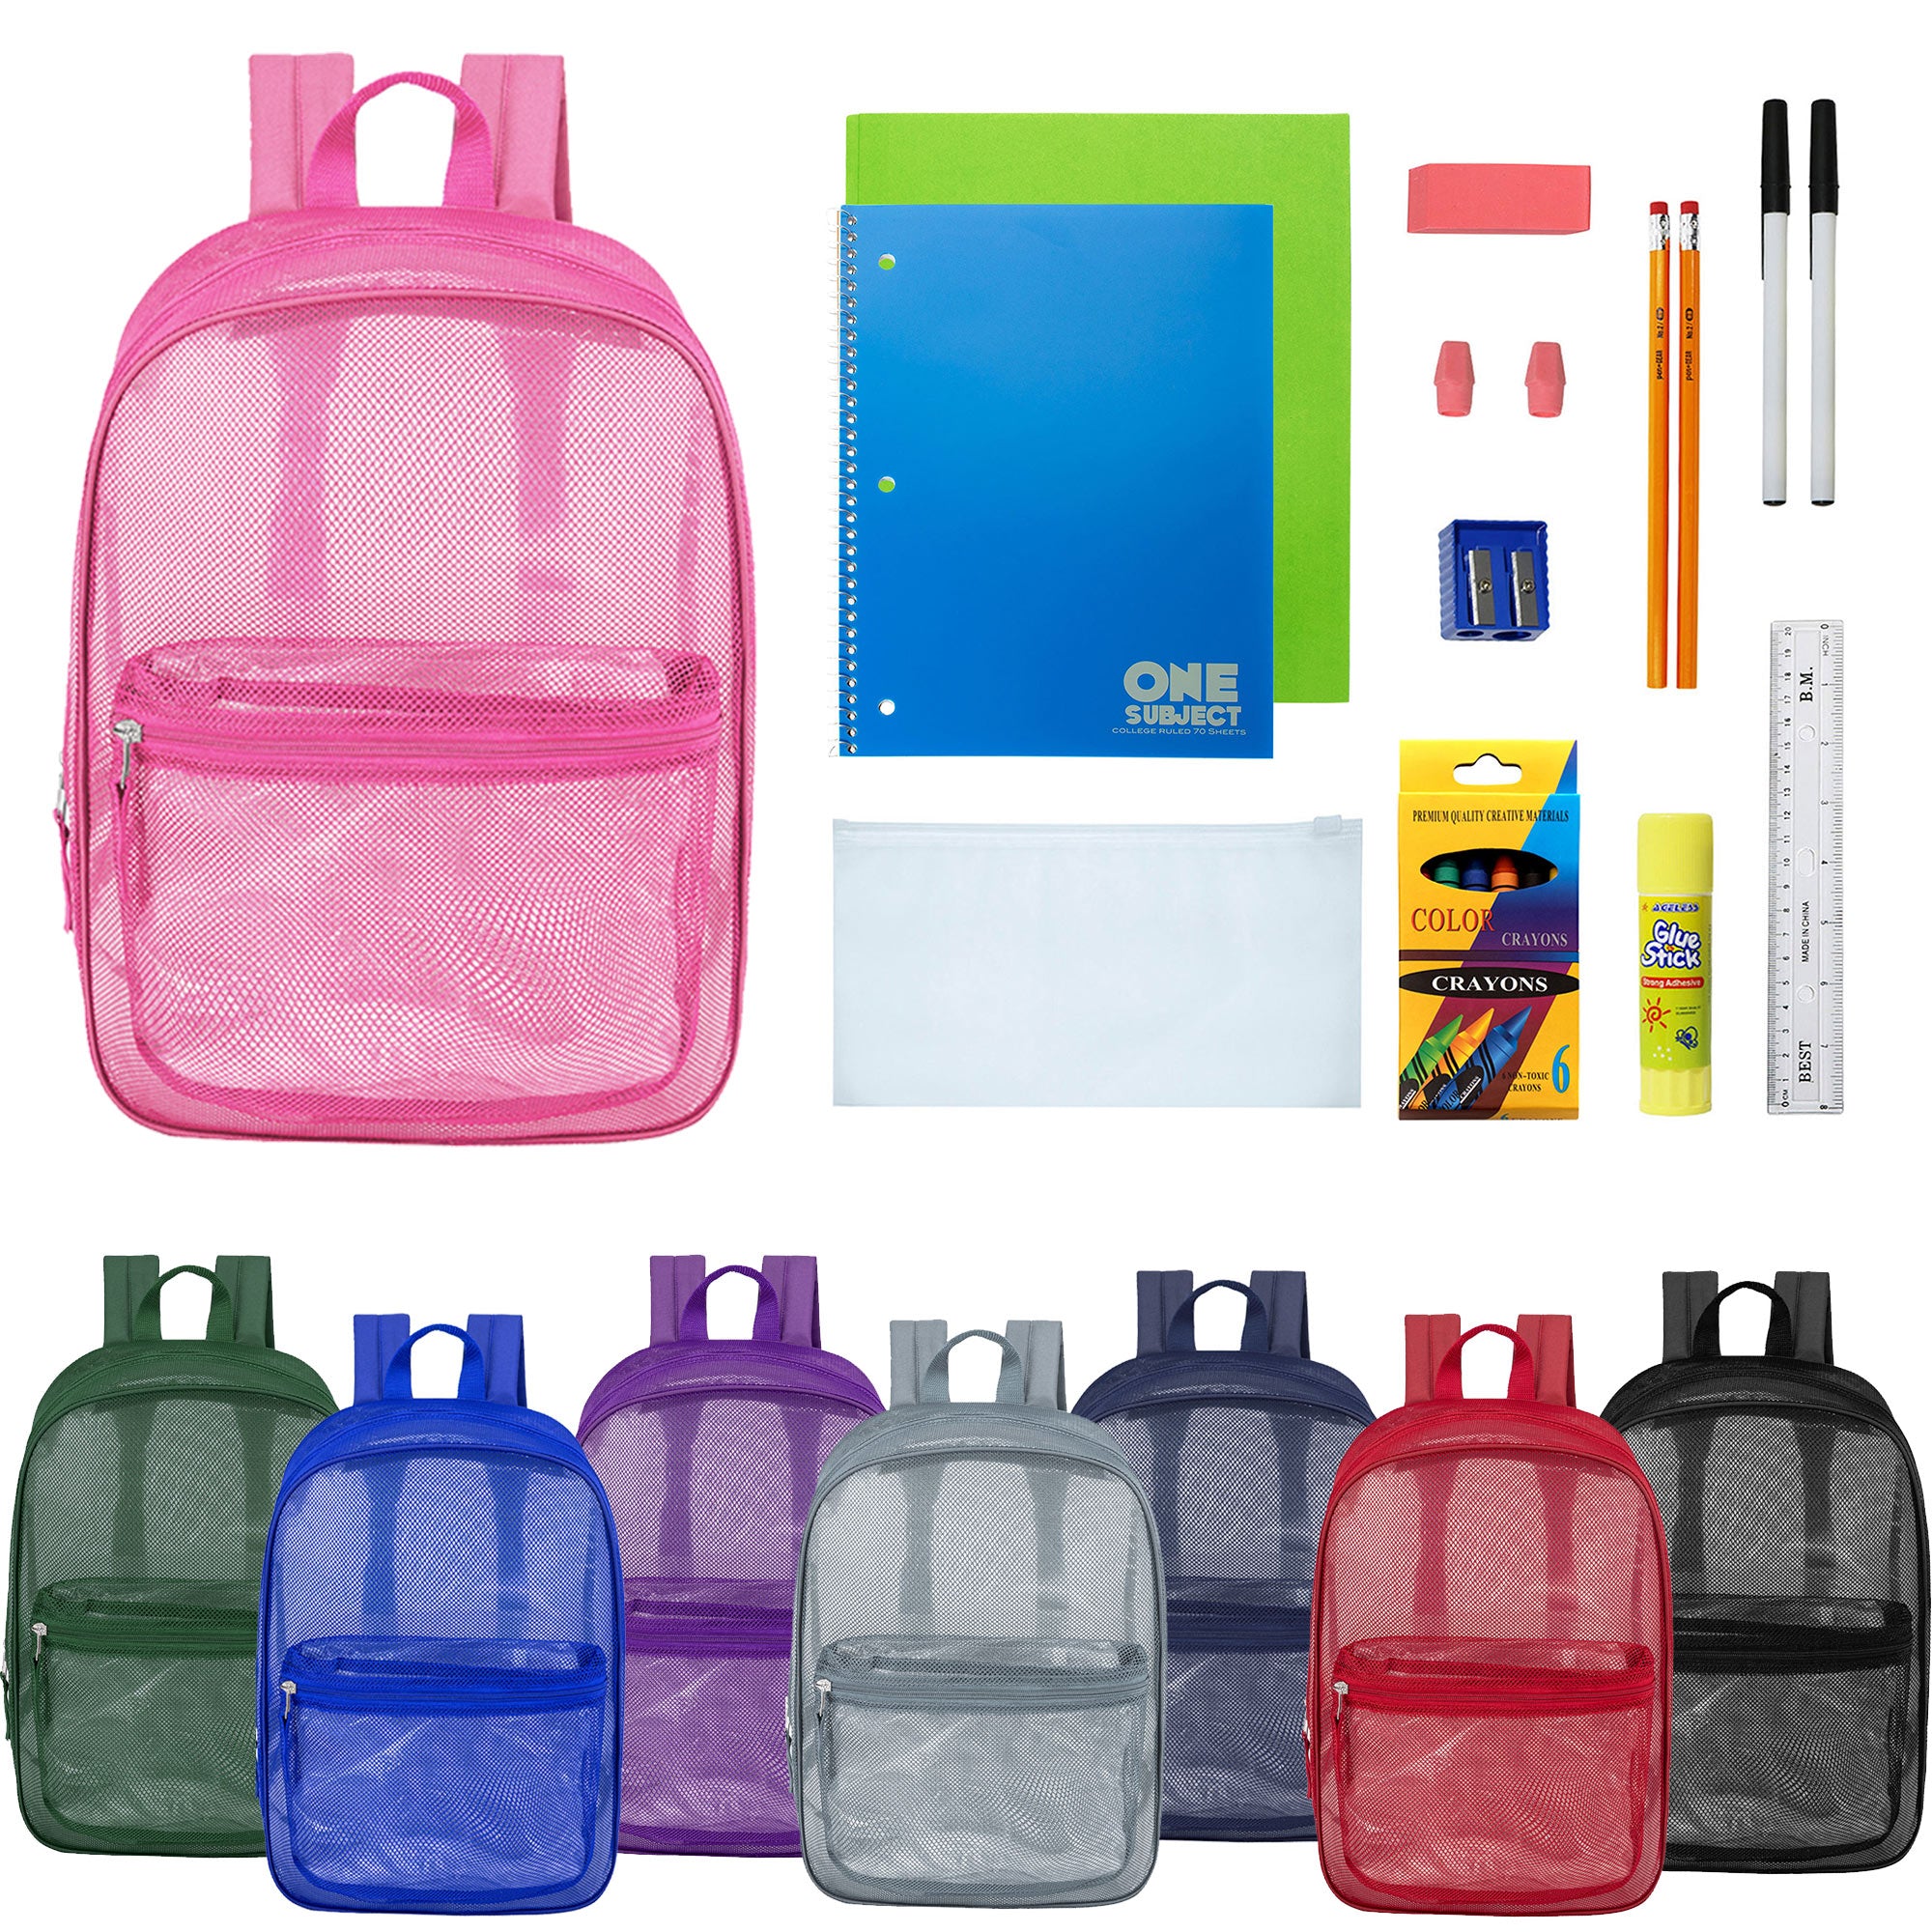 12 Wholesale 17" Mesh Backpacks in Assorted Colors & 12 Bulk School Supply Kits of Your Choice